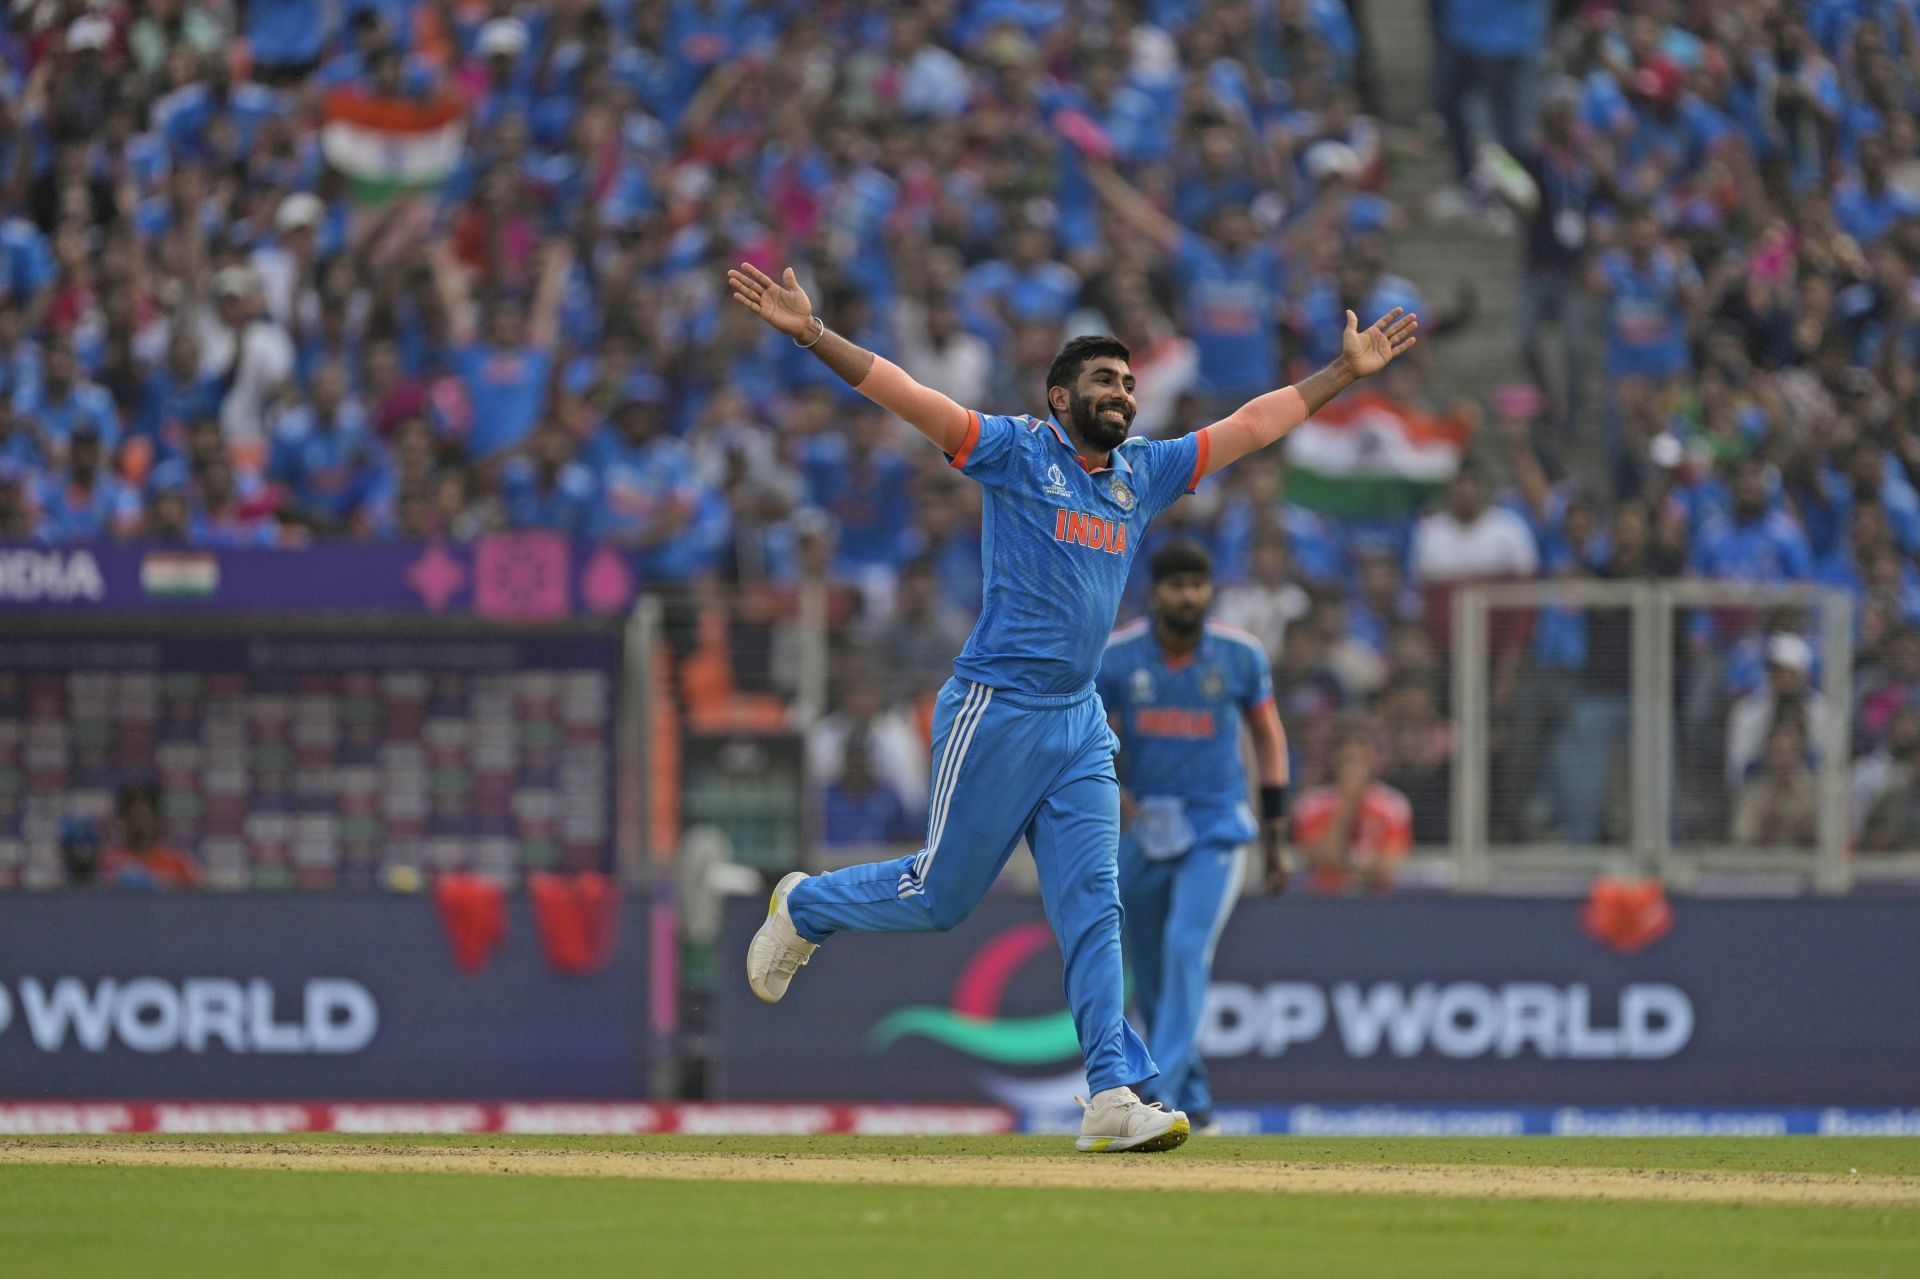 Jasprit Bumrah has been among the best bowlers on show so far. (Pic: AP)